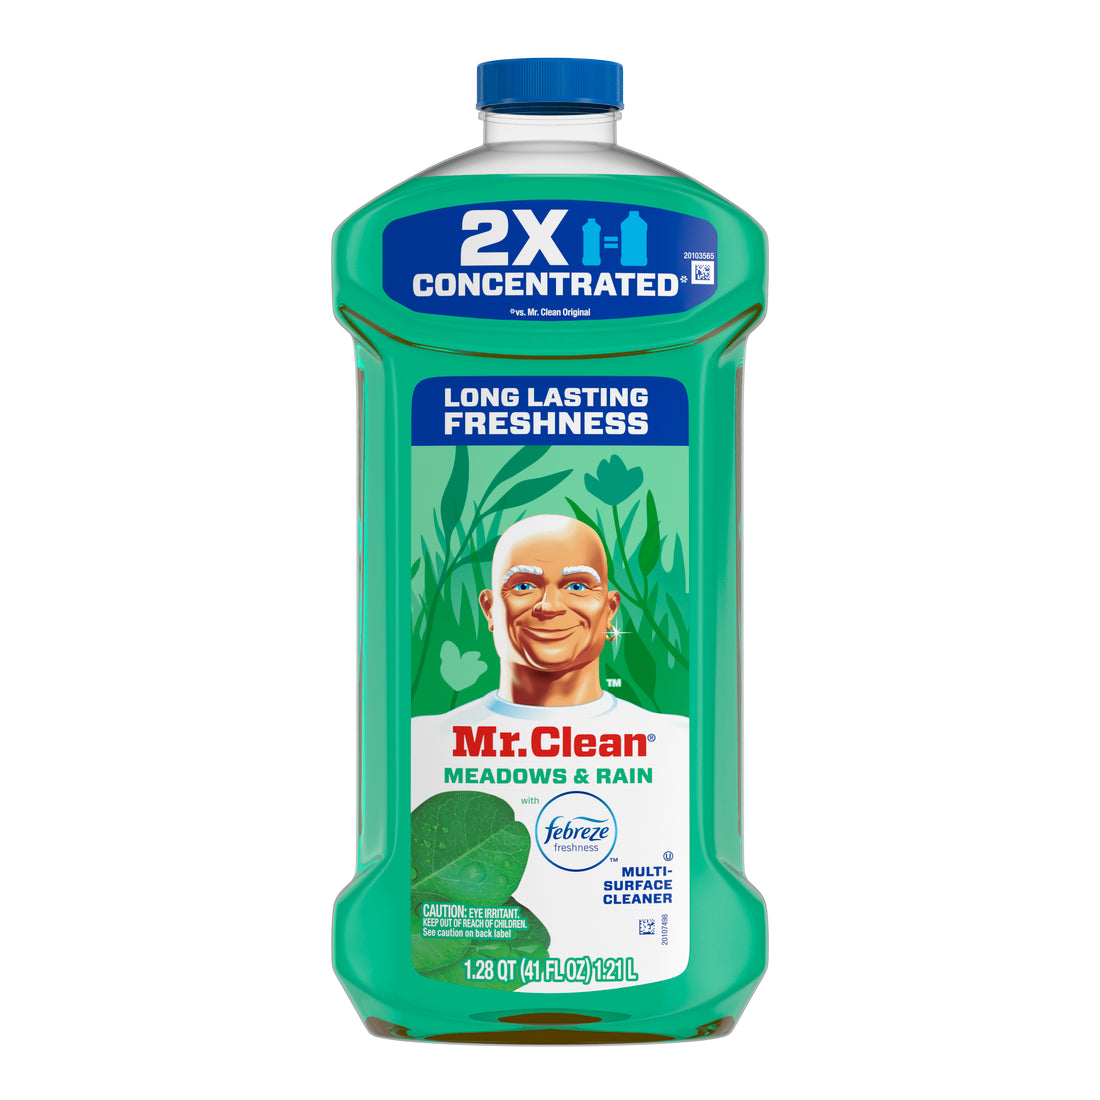 Mr. Clean 2X Concentrated Multi Surface Cleaner with Febreze Meadows & Rain Scent - 41oz/6pk